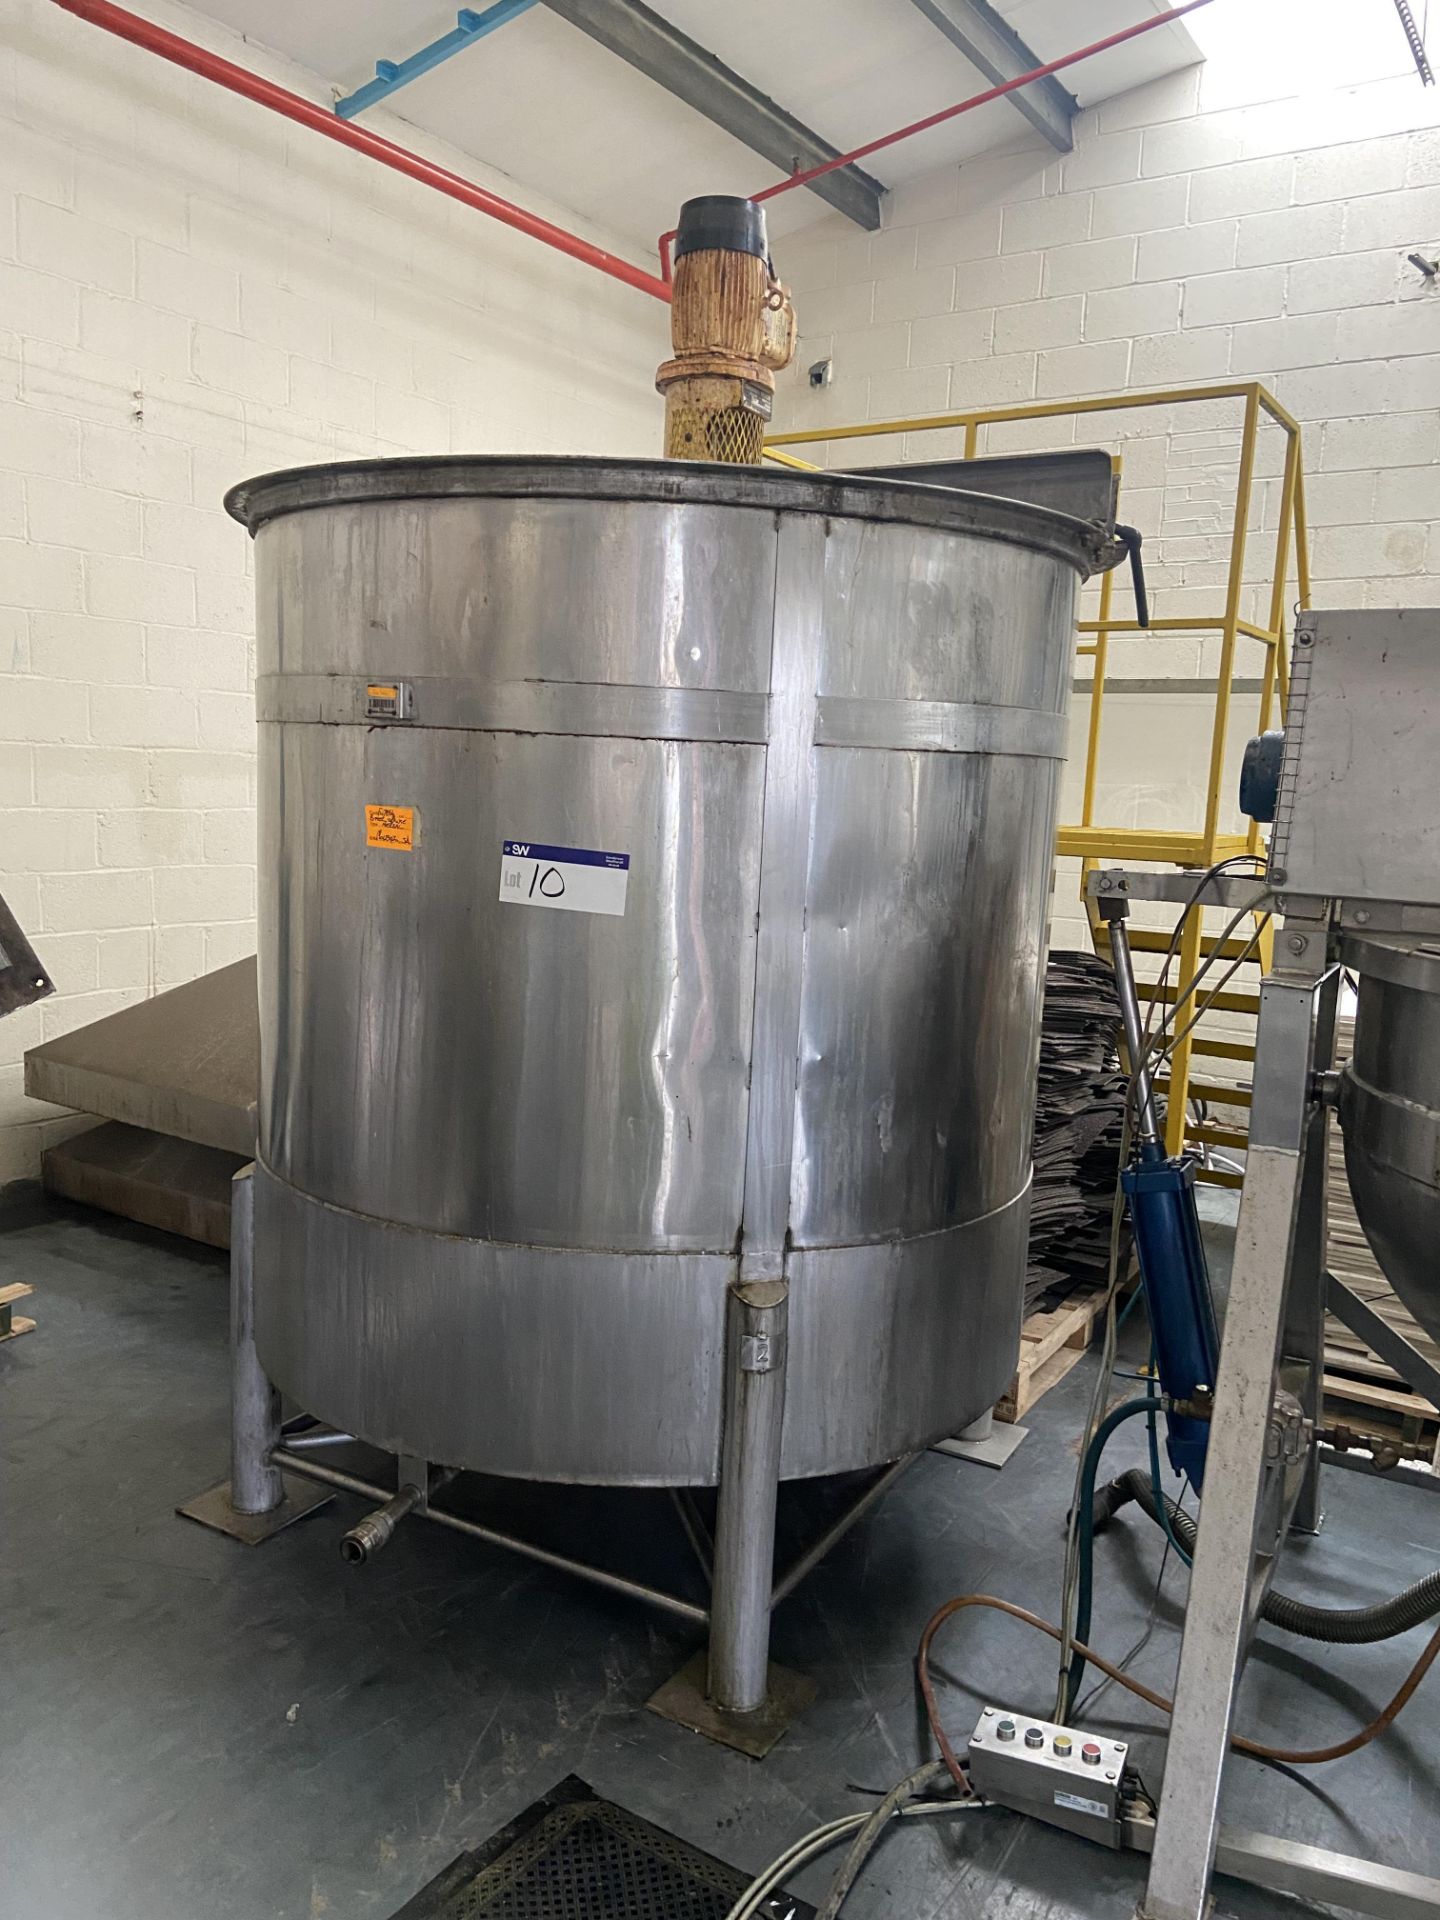 Greaves STAINLESS STEEL MIXING VESSEL, approx. 1.5m dia. x 1.6m deep, with vertical mounted mixer - Image 2 of 4